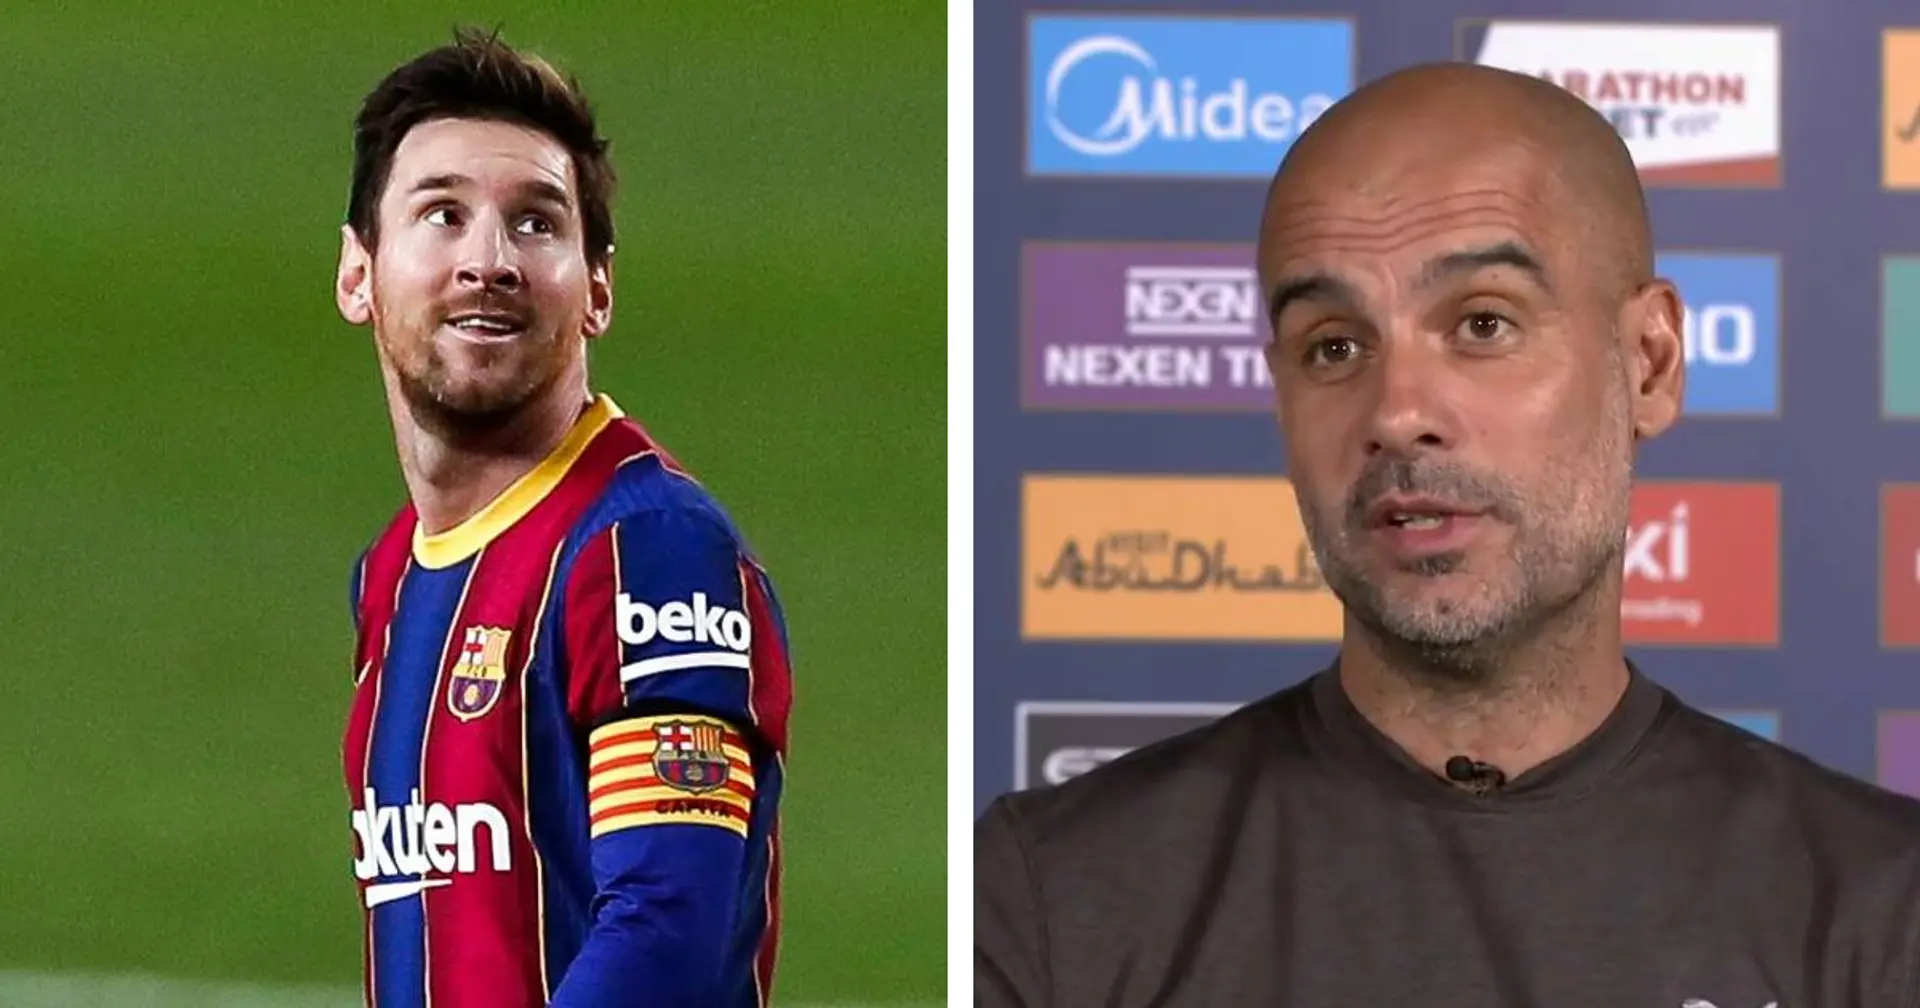 'What I want for Messi is to finish his career at Barca': Pep Guardiola stays clear of Leo rumours